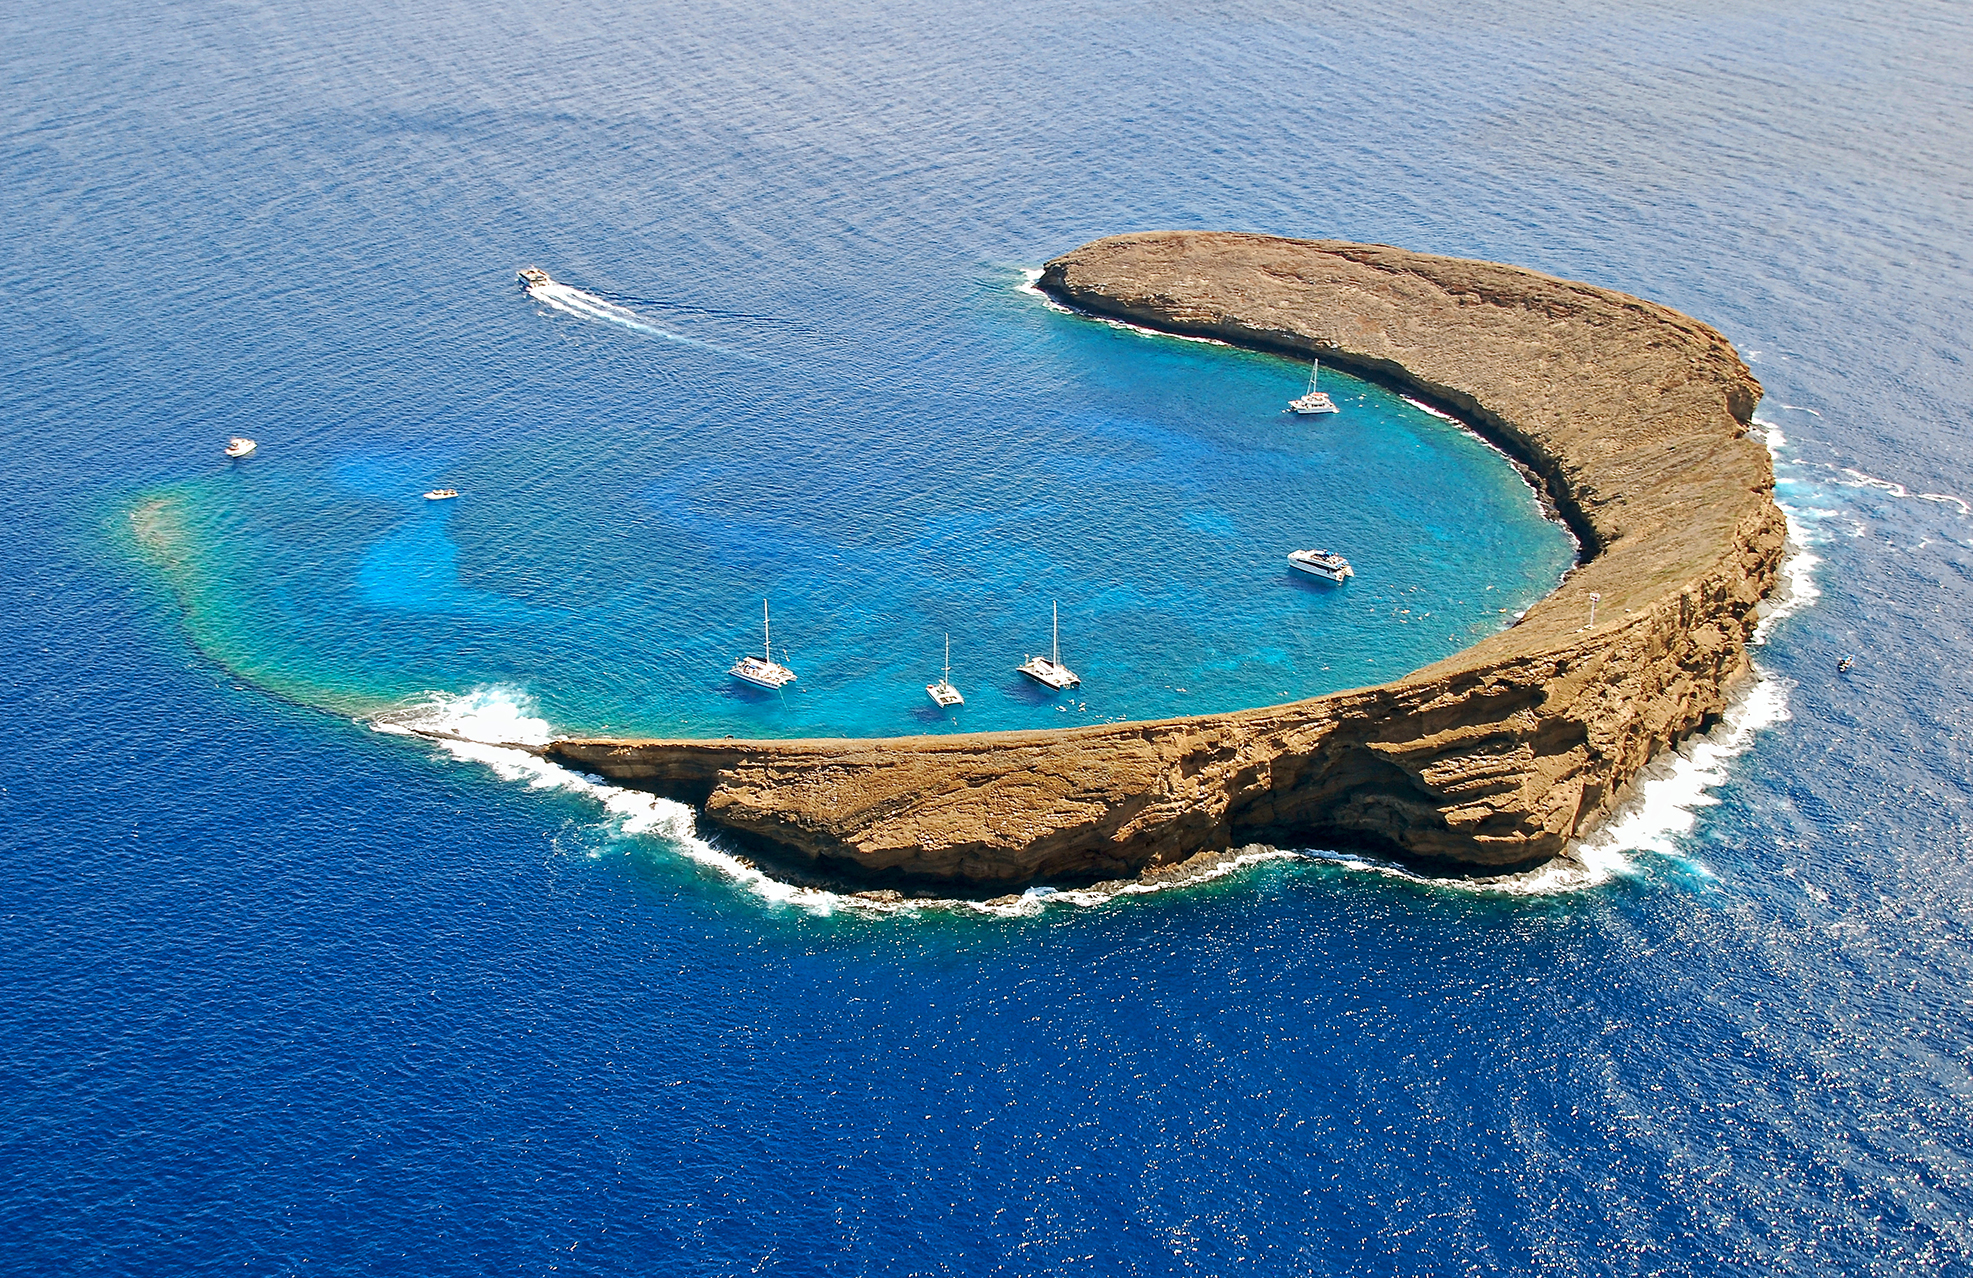 Divers and snorkelers in the water at Molokini a dormant volcanic crater